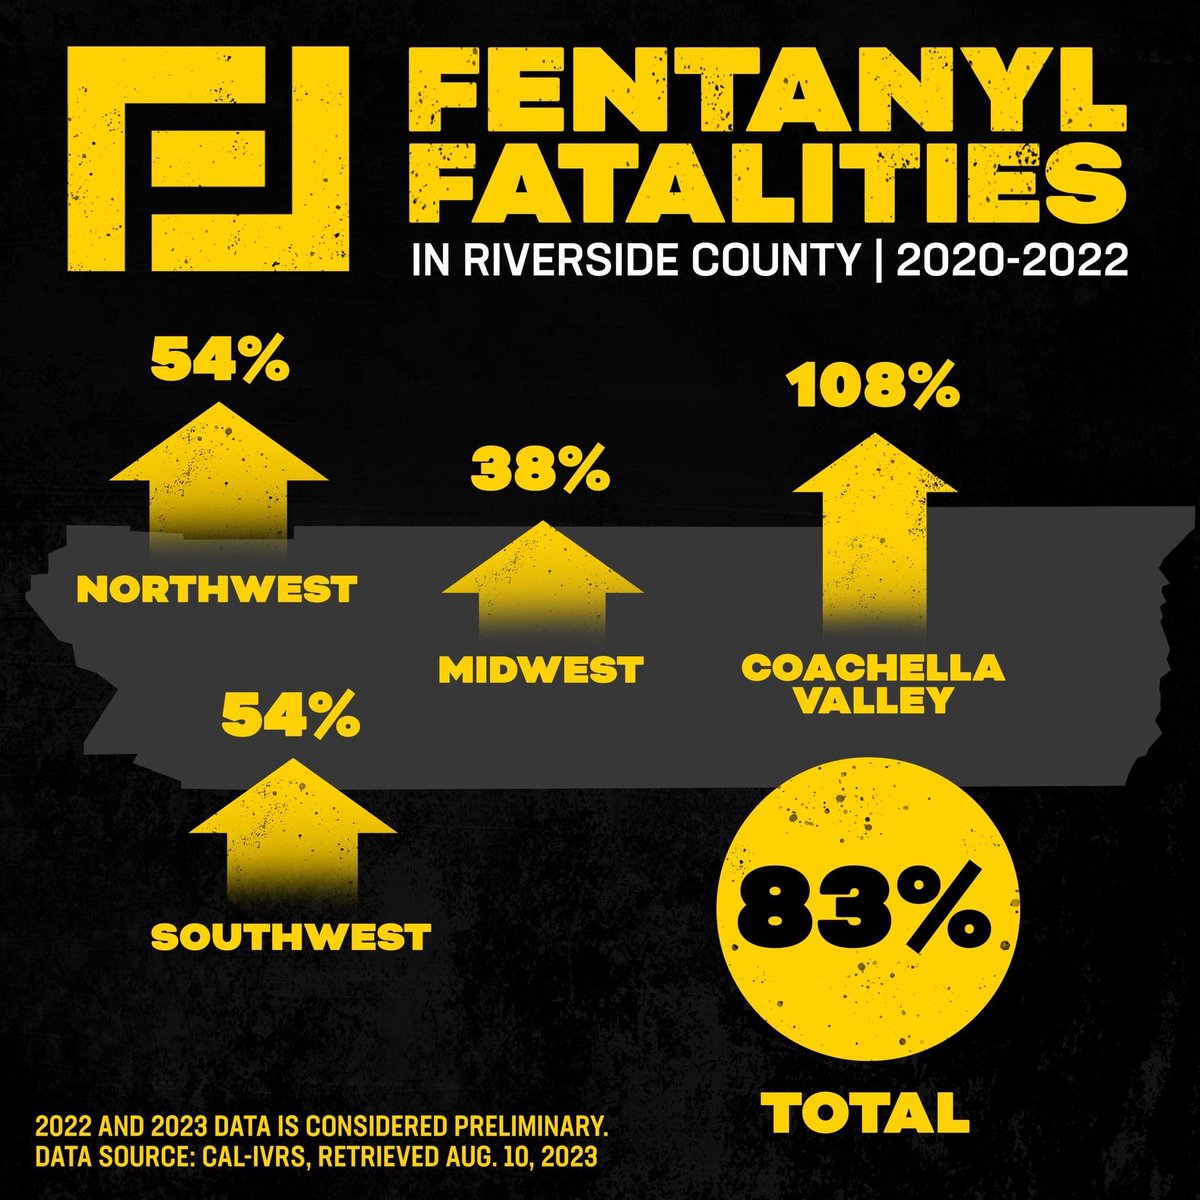 #FentanylAwarenessDay- Fentanyl deaths more than doubling in Riverside County since 2020. 

For more information about the deadly dangers of fentanyl, visit facesoffentanyl.net